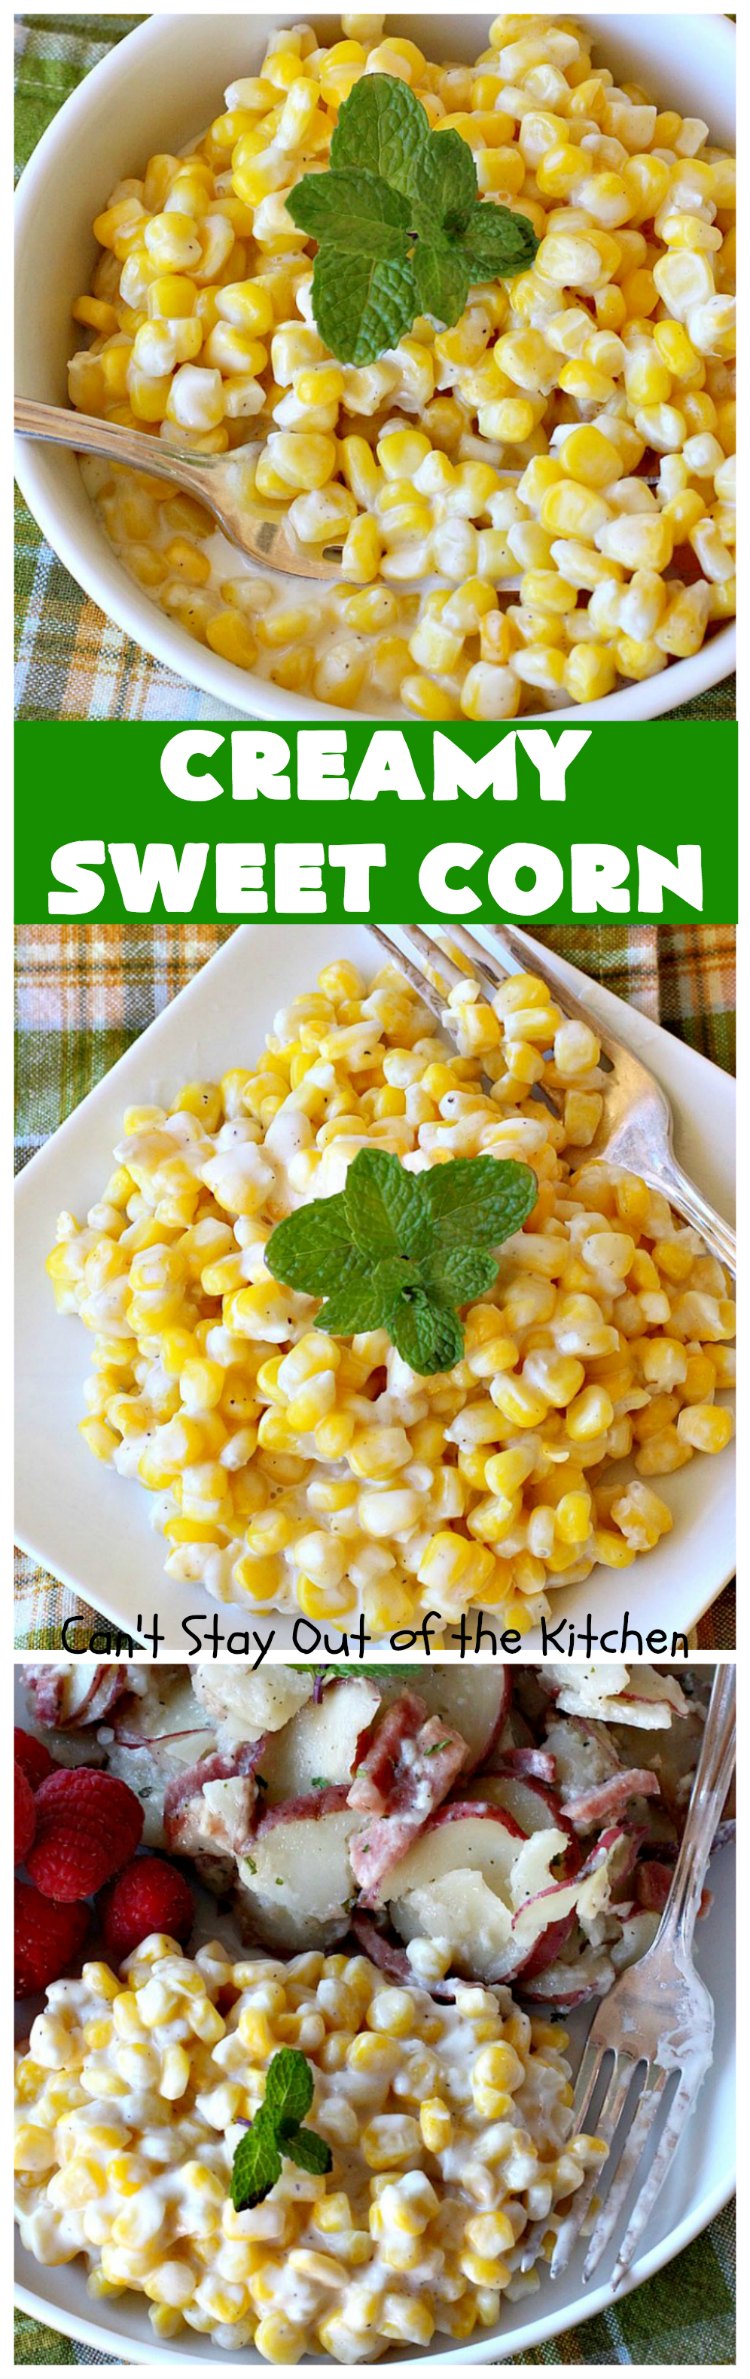 Creamy Sweet Corn | Can't Stay Out of the Kitchen